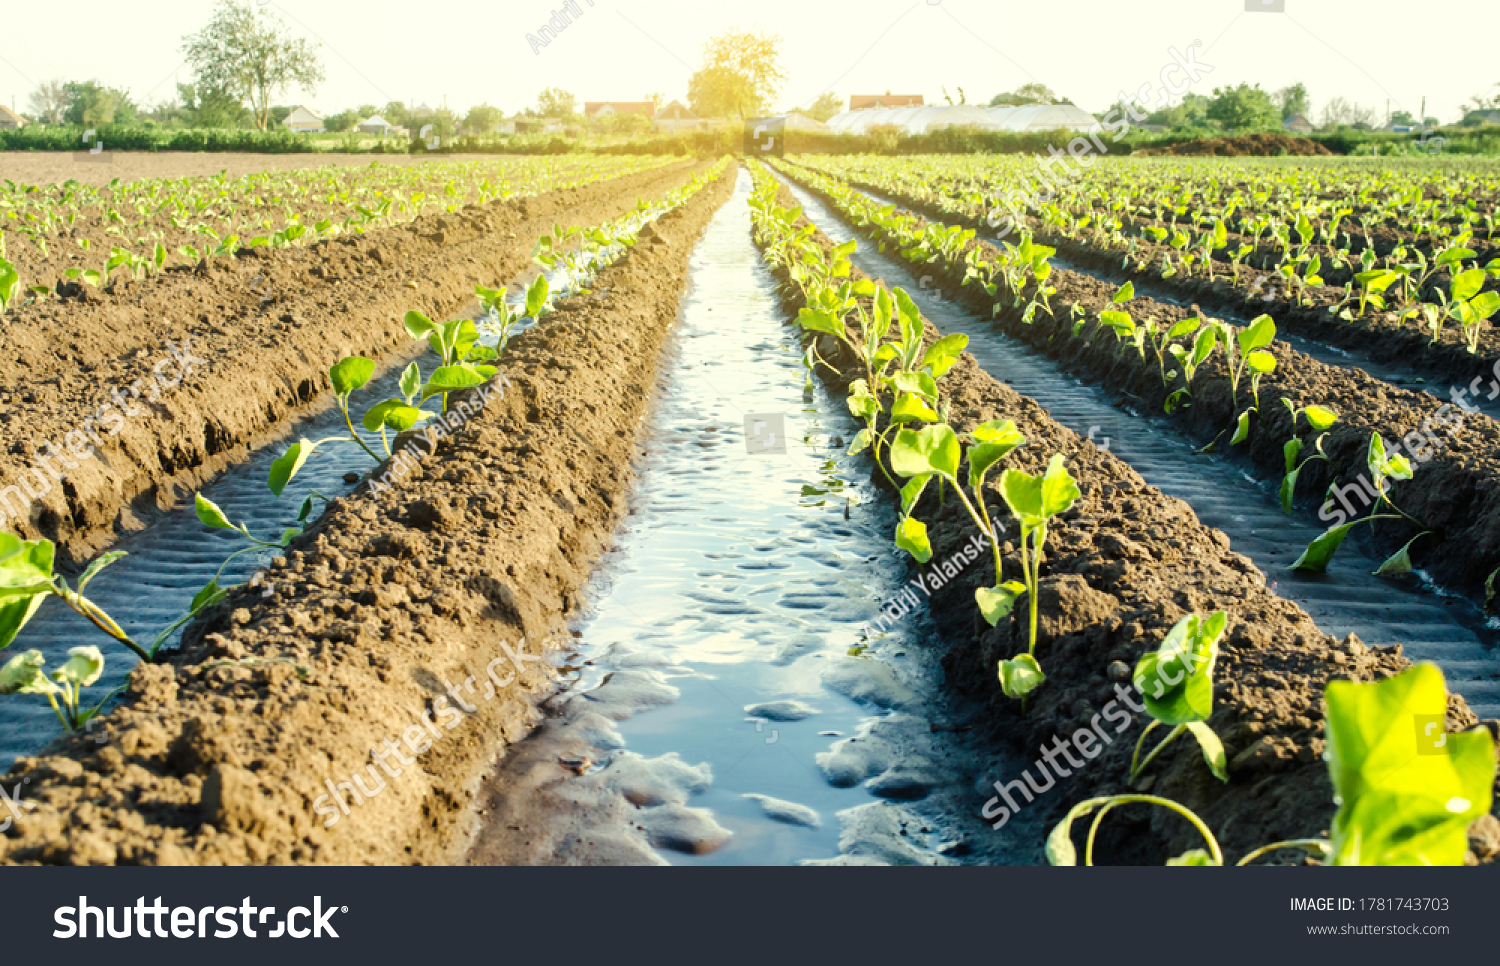 Water flows through irrigation canals on a farm eggplant plantation. Caring for plants, growing food. Agriculture and agribusiness. Conservation of water resources and reduction pollution. #1781743703